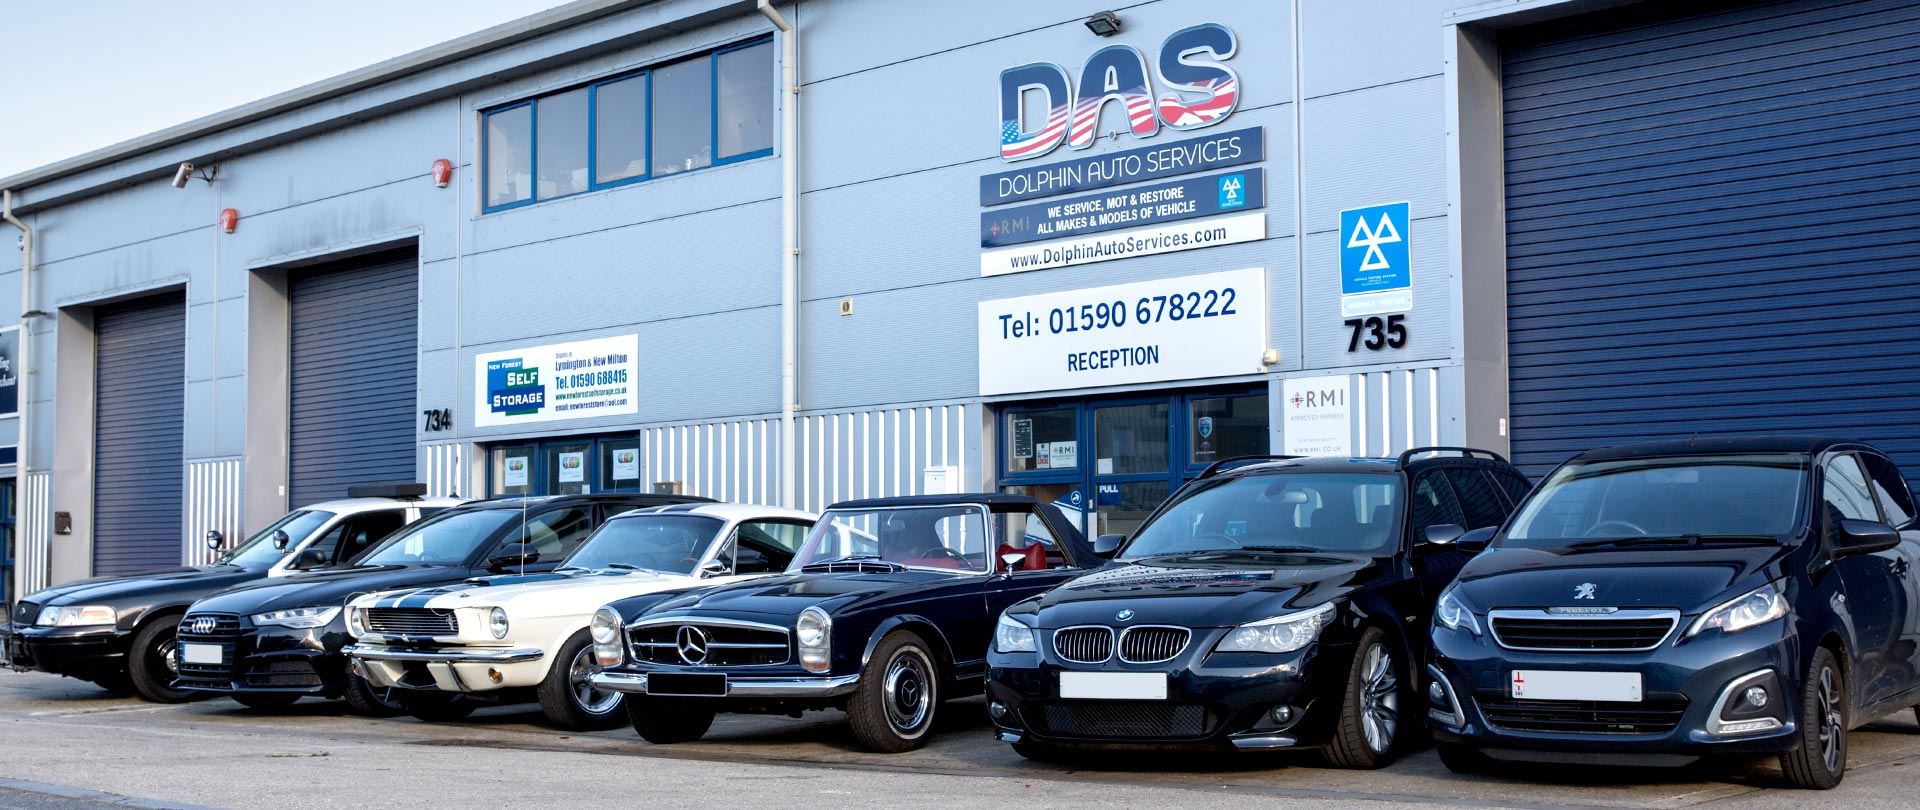 MOT, service & repairs on all types of vehicle